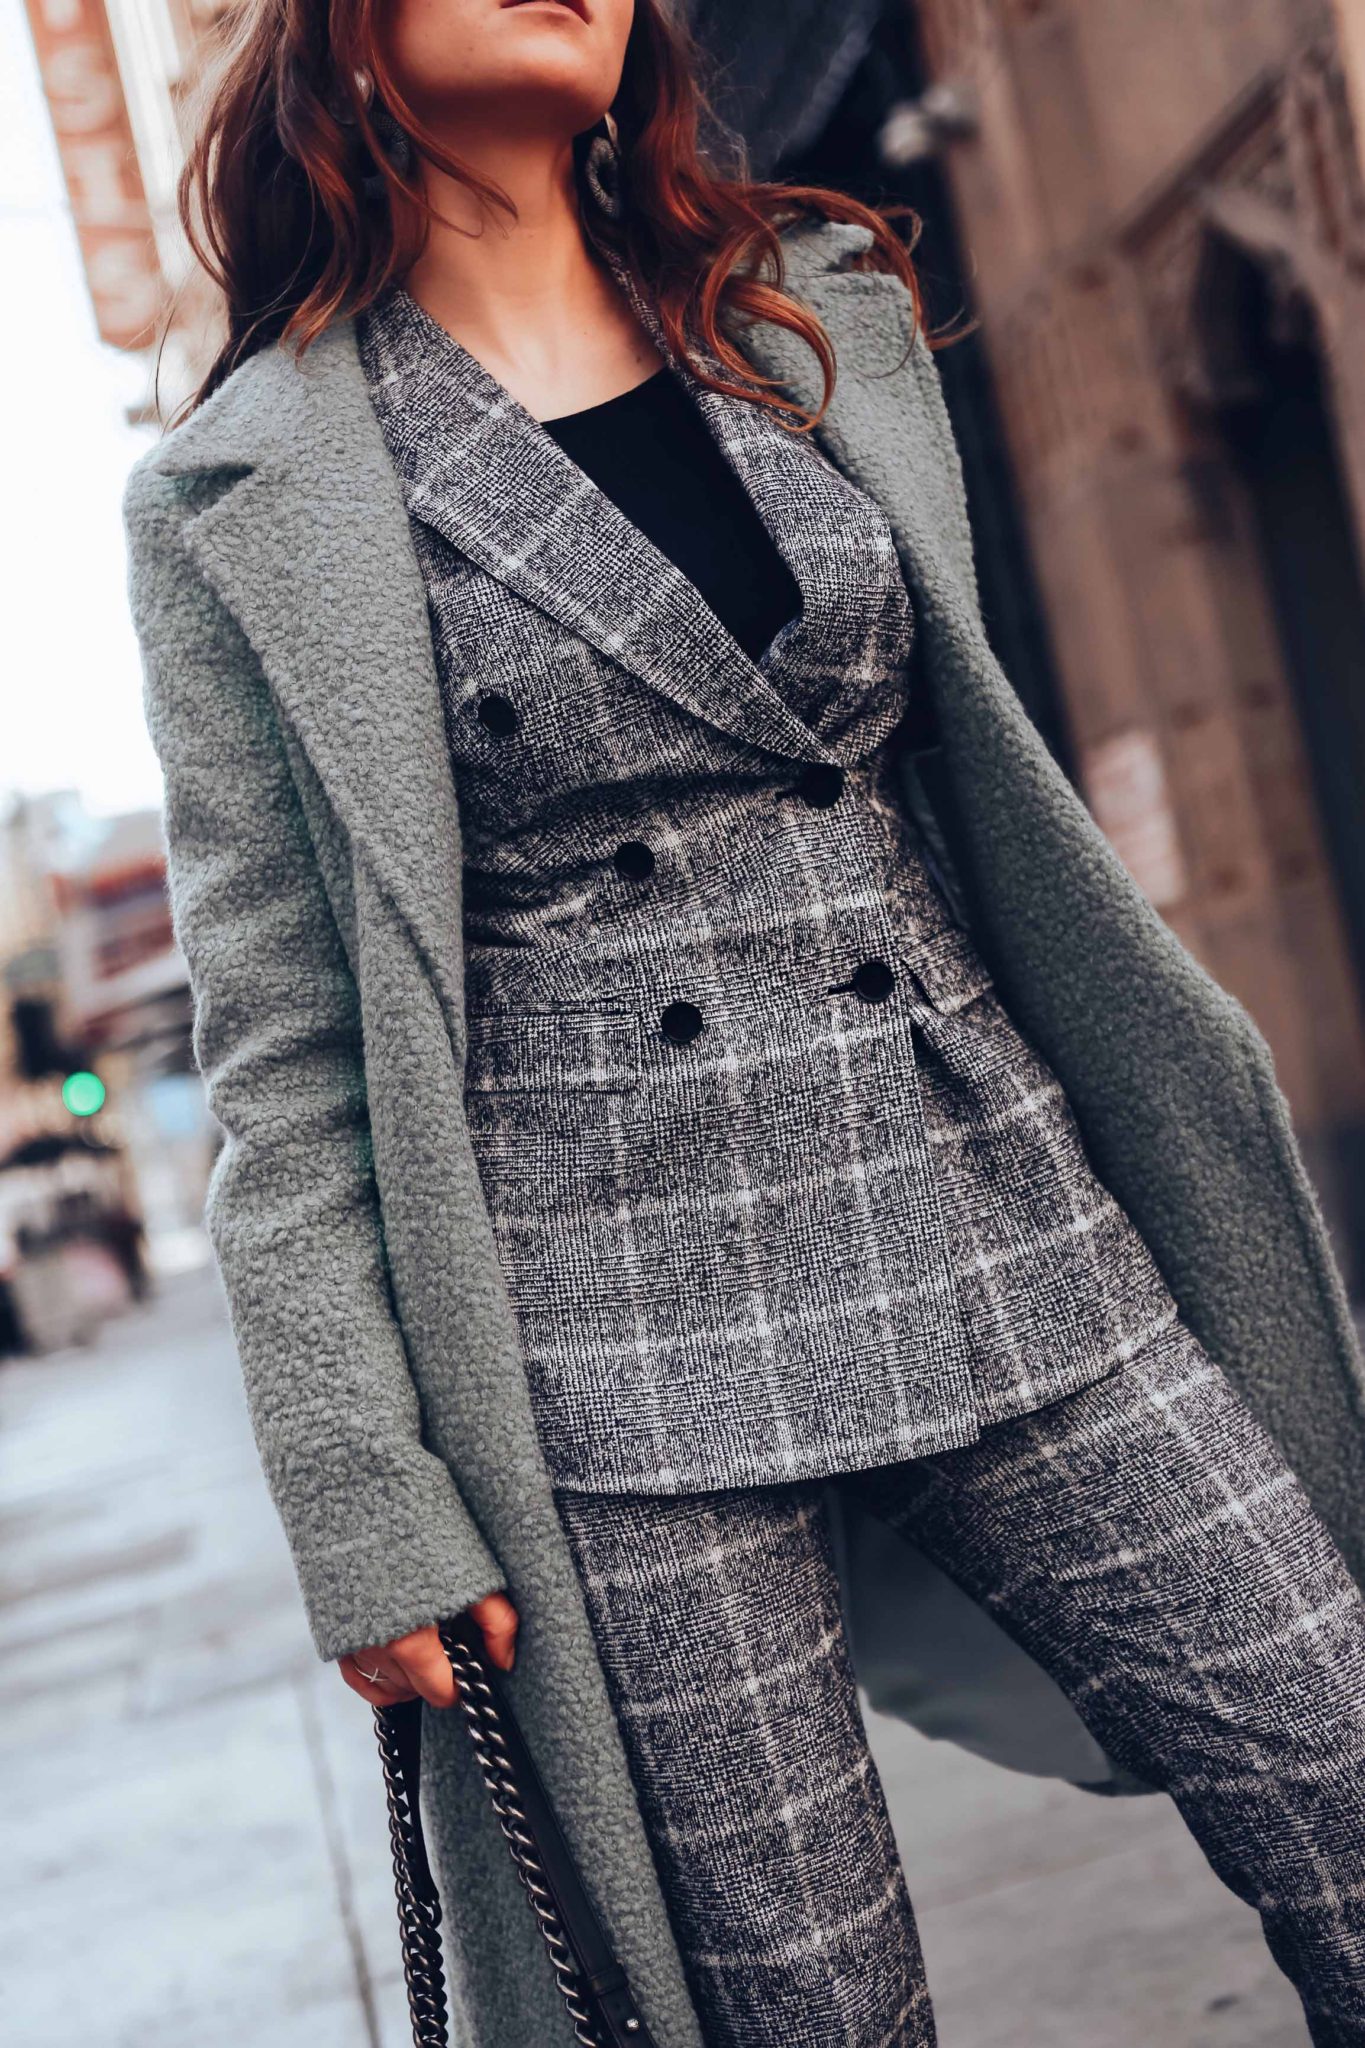 How to wear the business suits for women - Where to buy women suits: SuiStudio review and Check suits trend on Houseofcomil.com. Suits styled by Julia Comil French Fashion Blogger in Los Angeles